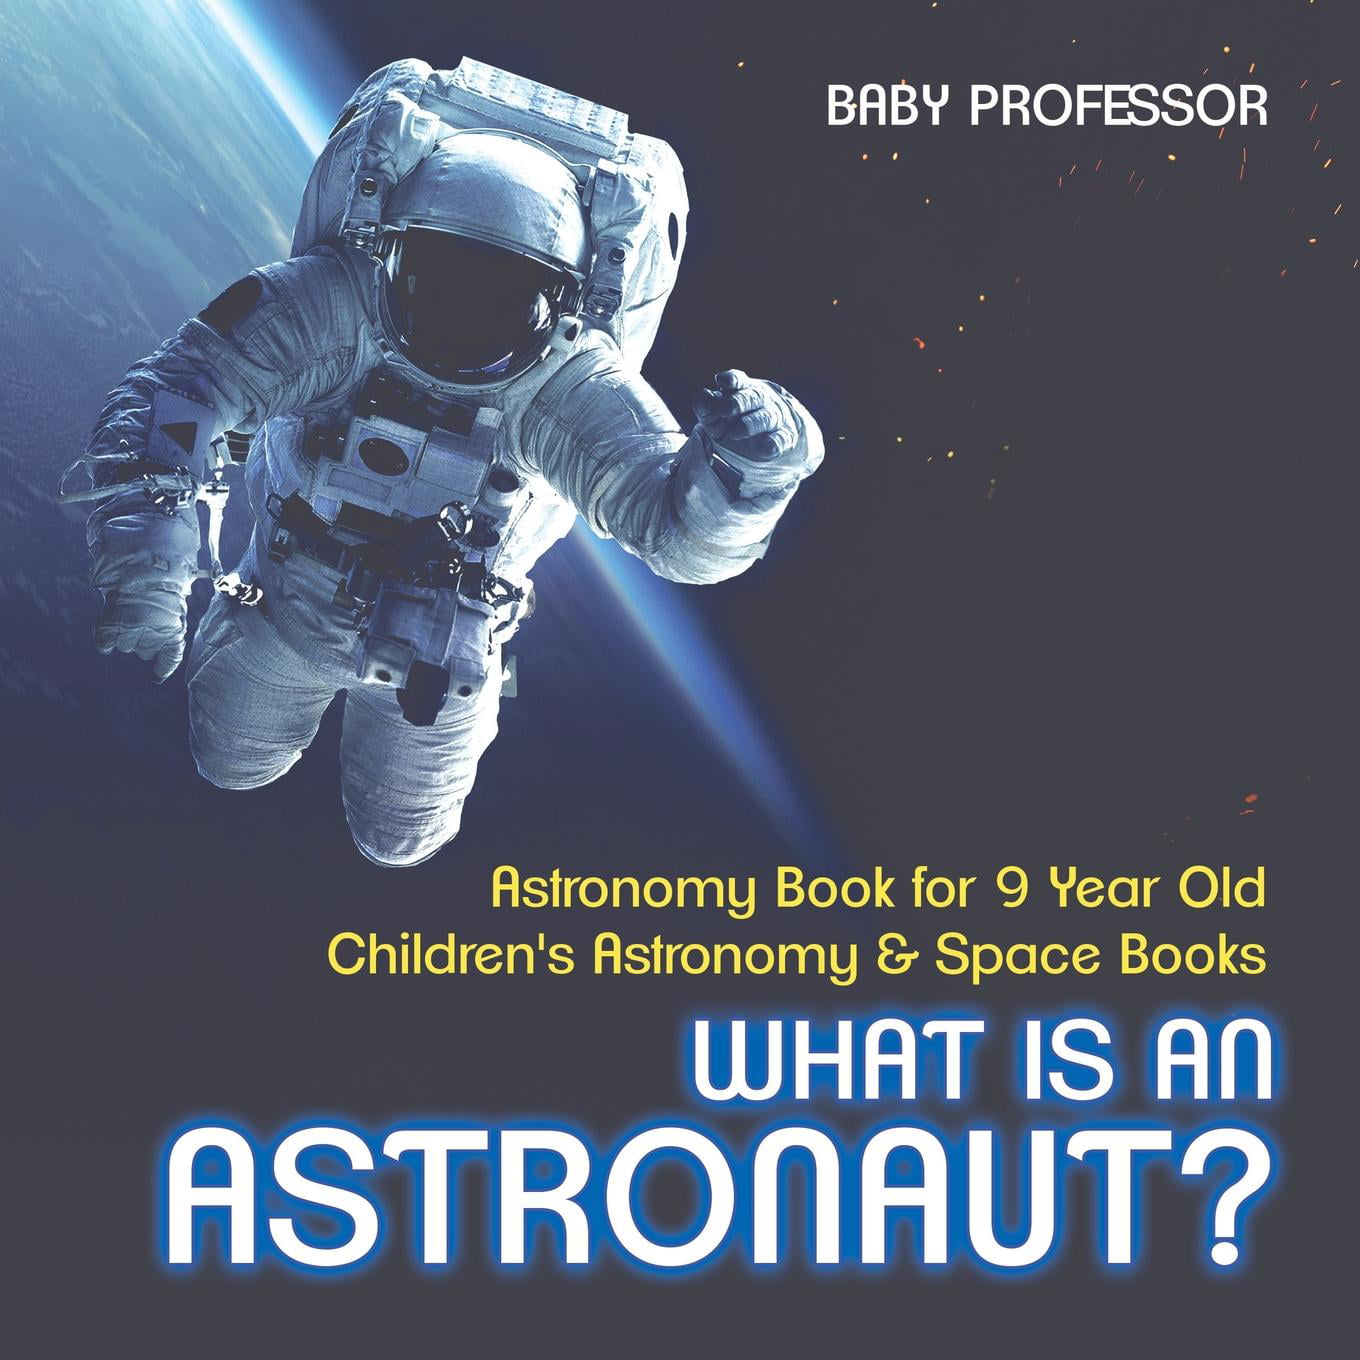 Astronaut book. Астрономия книга. Space Science book. Scientific book which is about astronomiya pdf. Книга скафандр